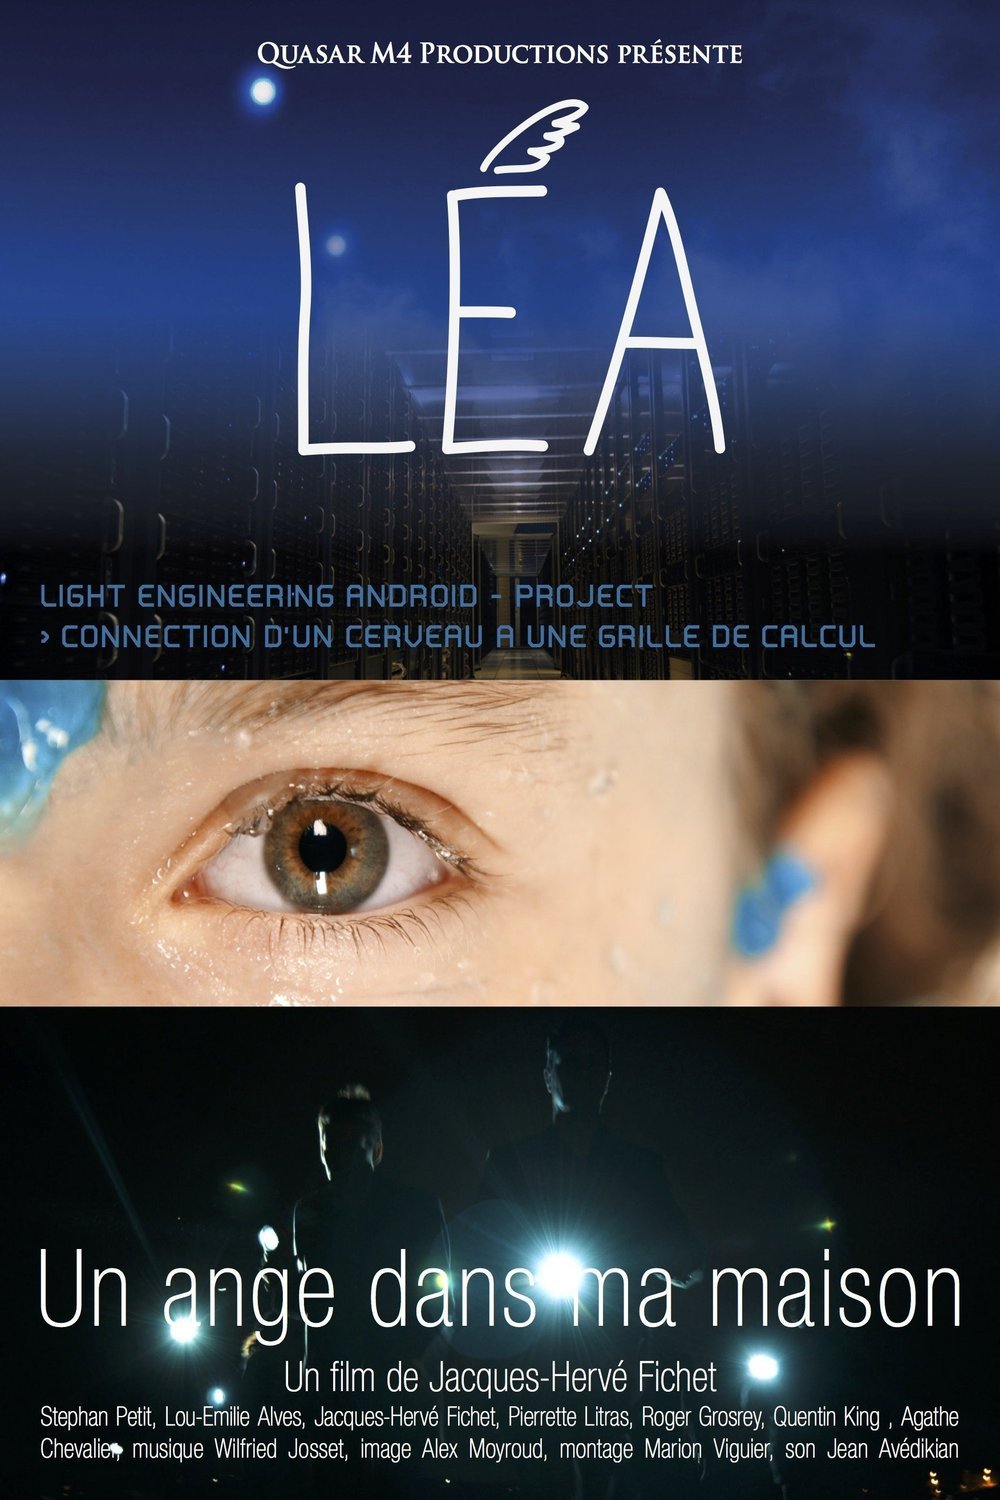 Poster of the movie Lea: Light Engineering Android